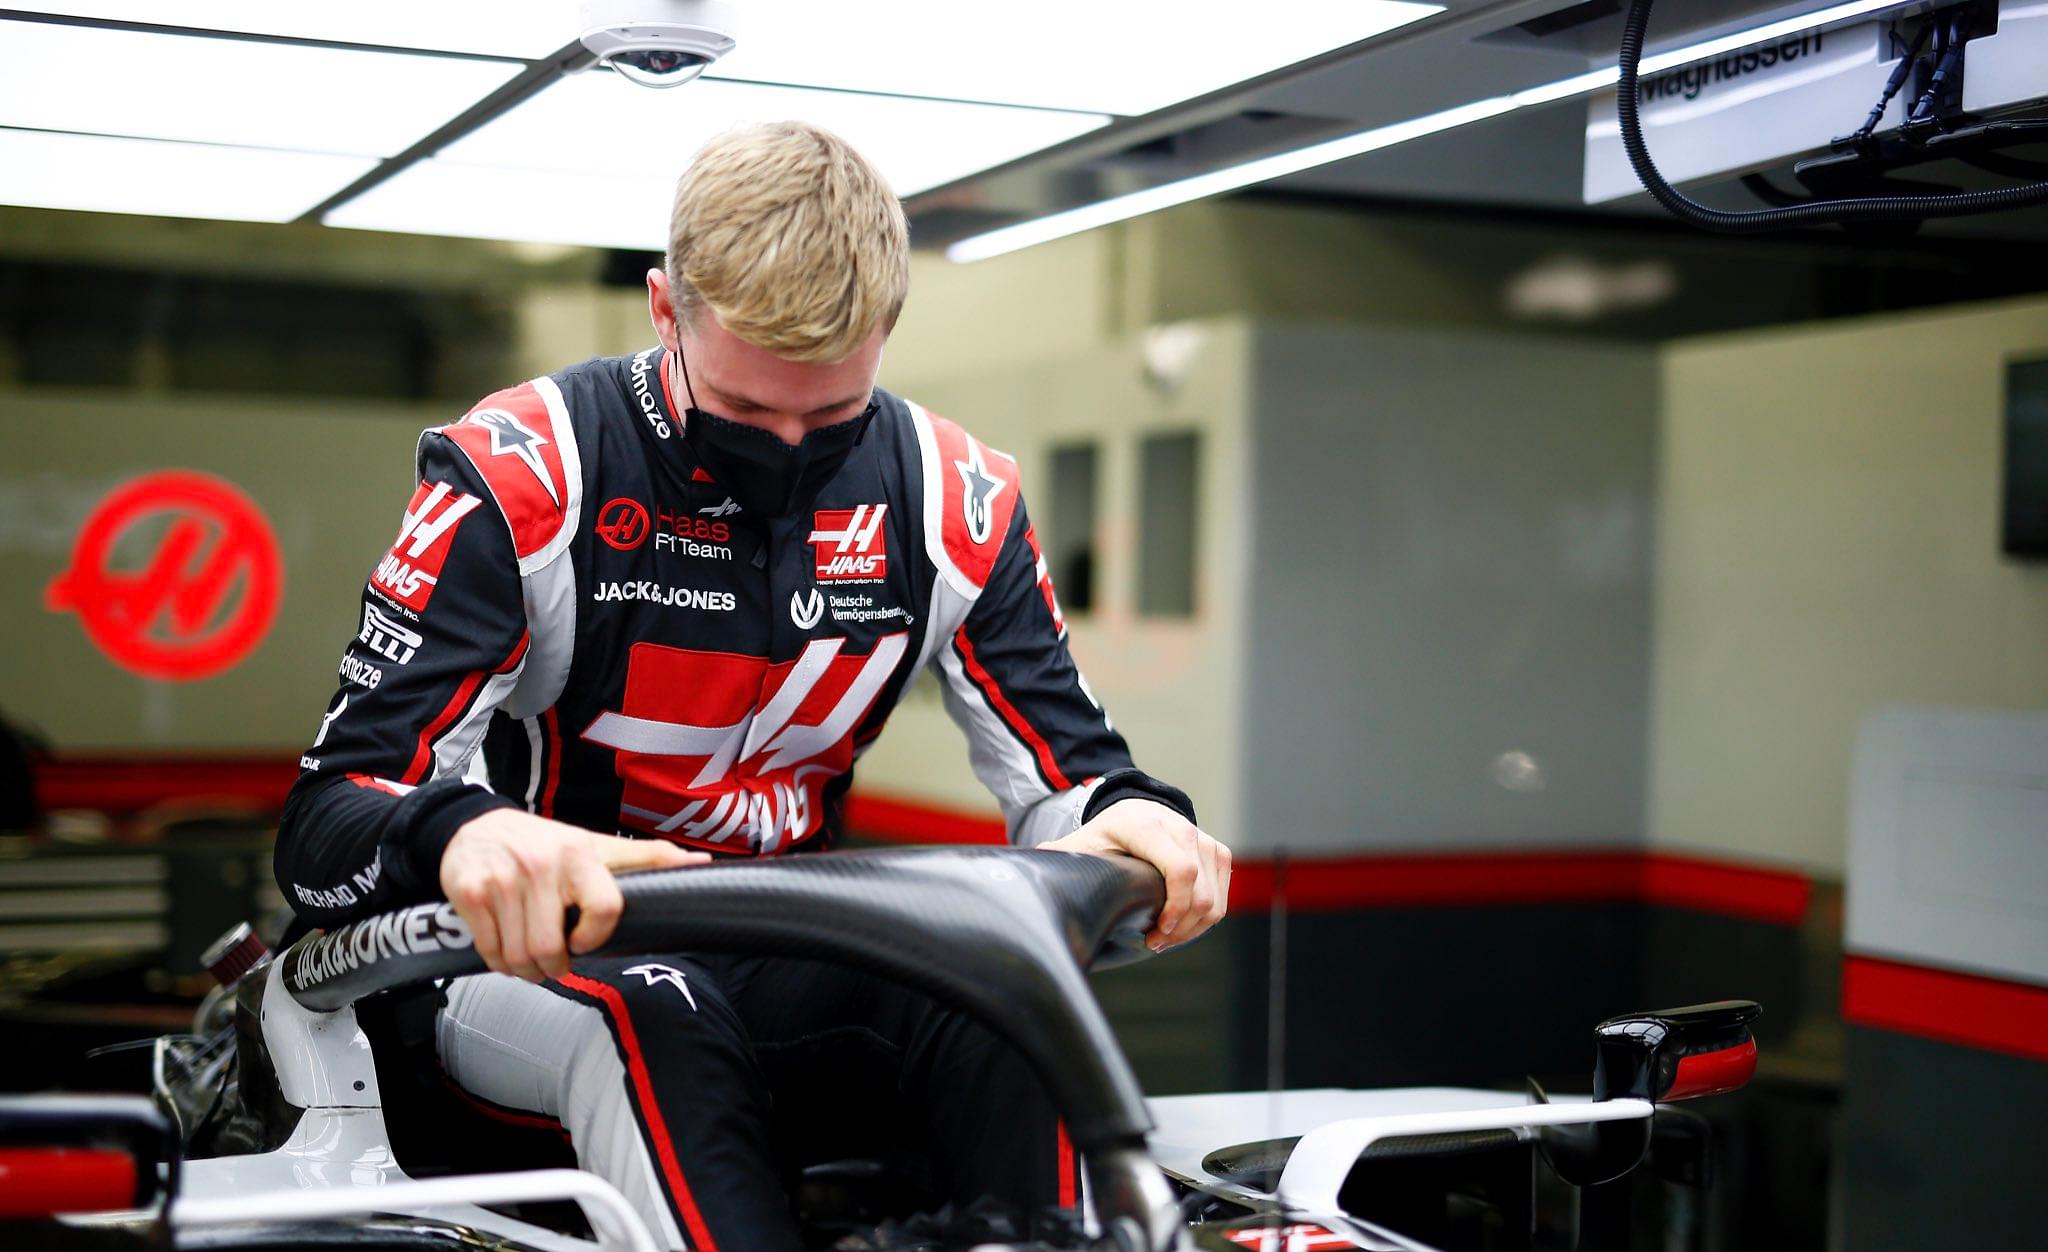 “I’m here at the factory" - Mick Schumacher completes his seat fitting with the Haas F1 team